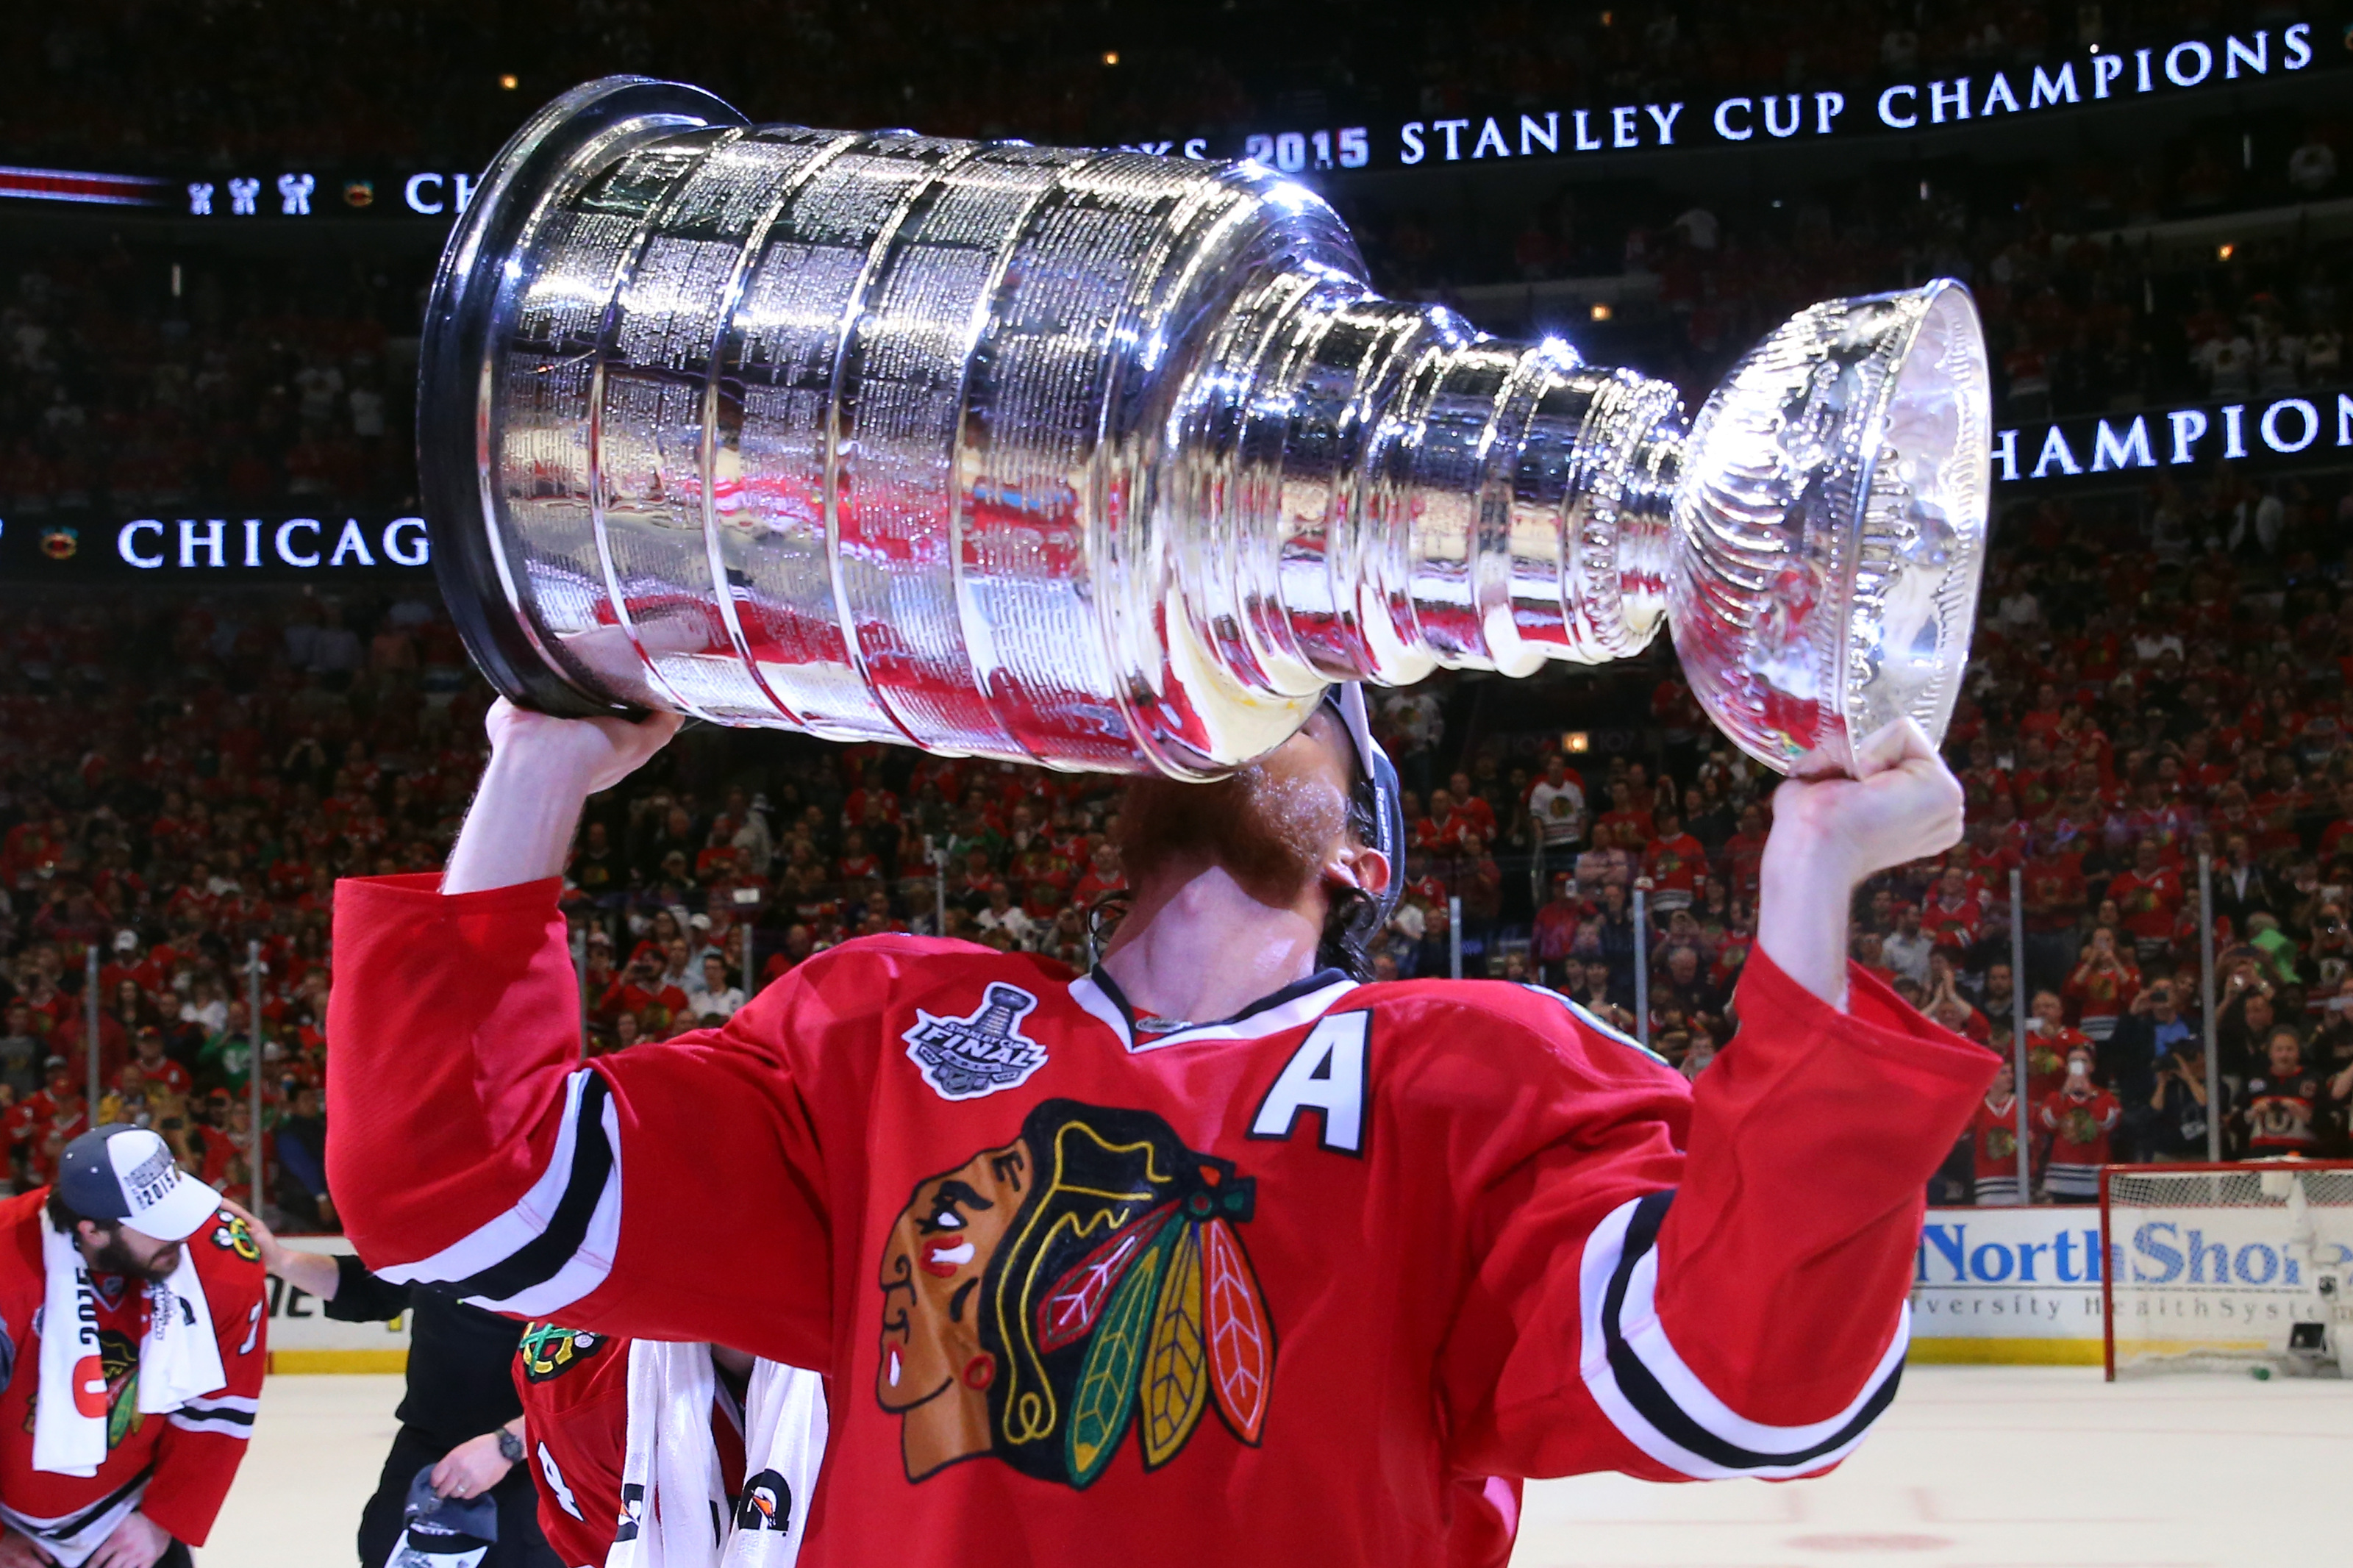 Oilers' Duncan Keith announces retirement after 17 seasons